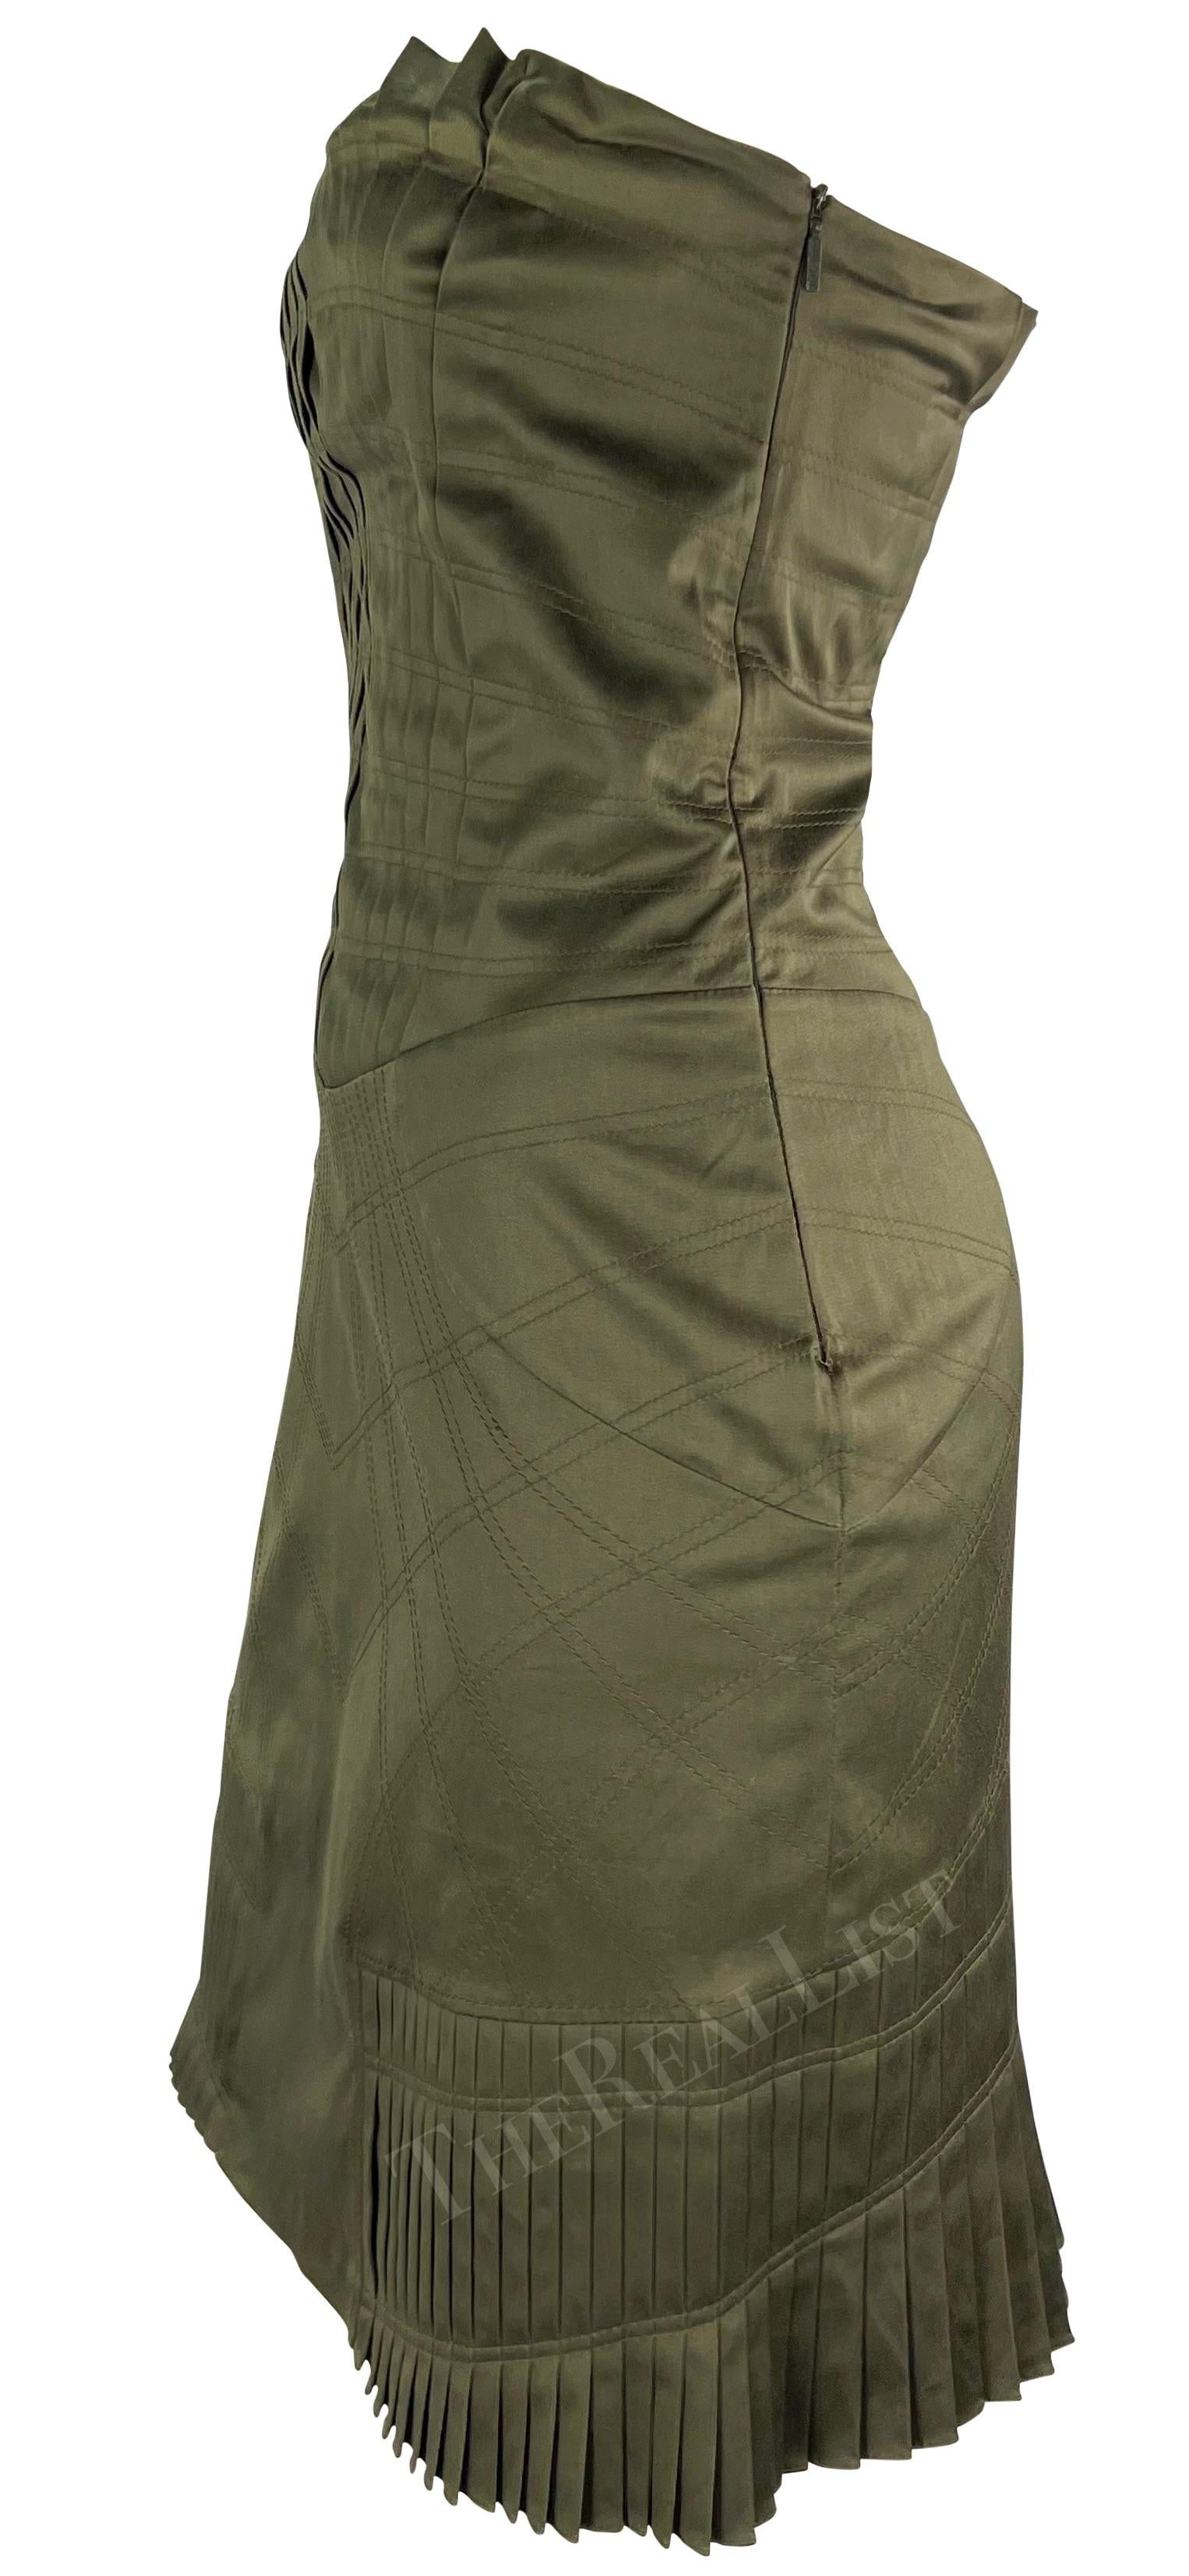 S/S 2004 Gucci by Tom Ford Olive Green Fan Pleated Strapless Mini Dress In Good Condition For Sale In West Hollywood, CA